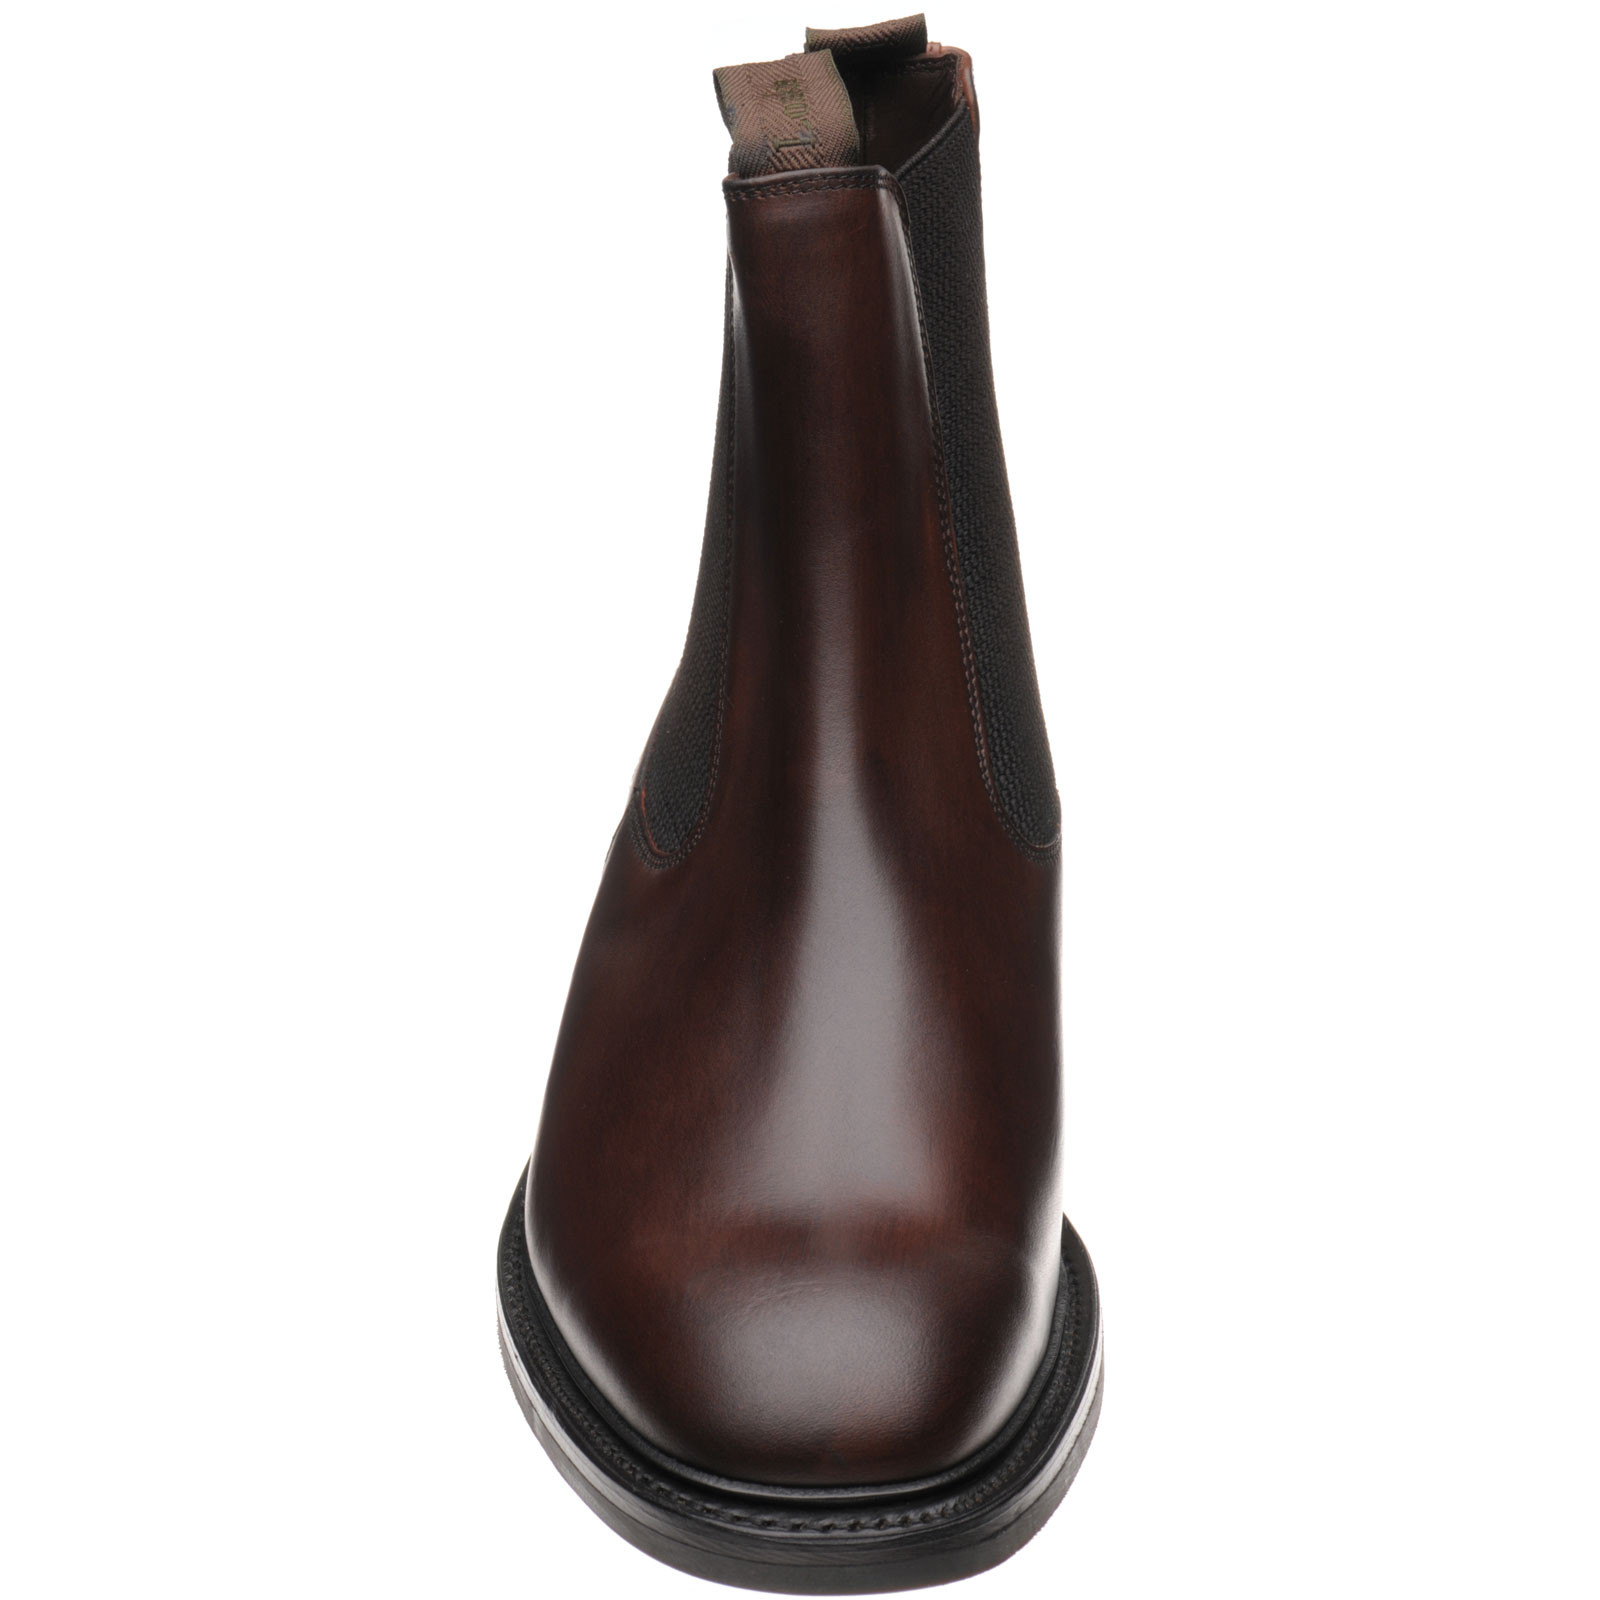 Loake shoes | Loake 1880 Classic | Dingley rubber-soled Chelsea boots ...